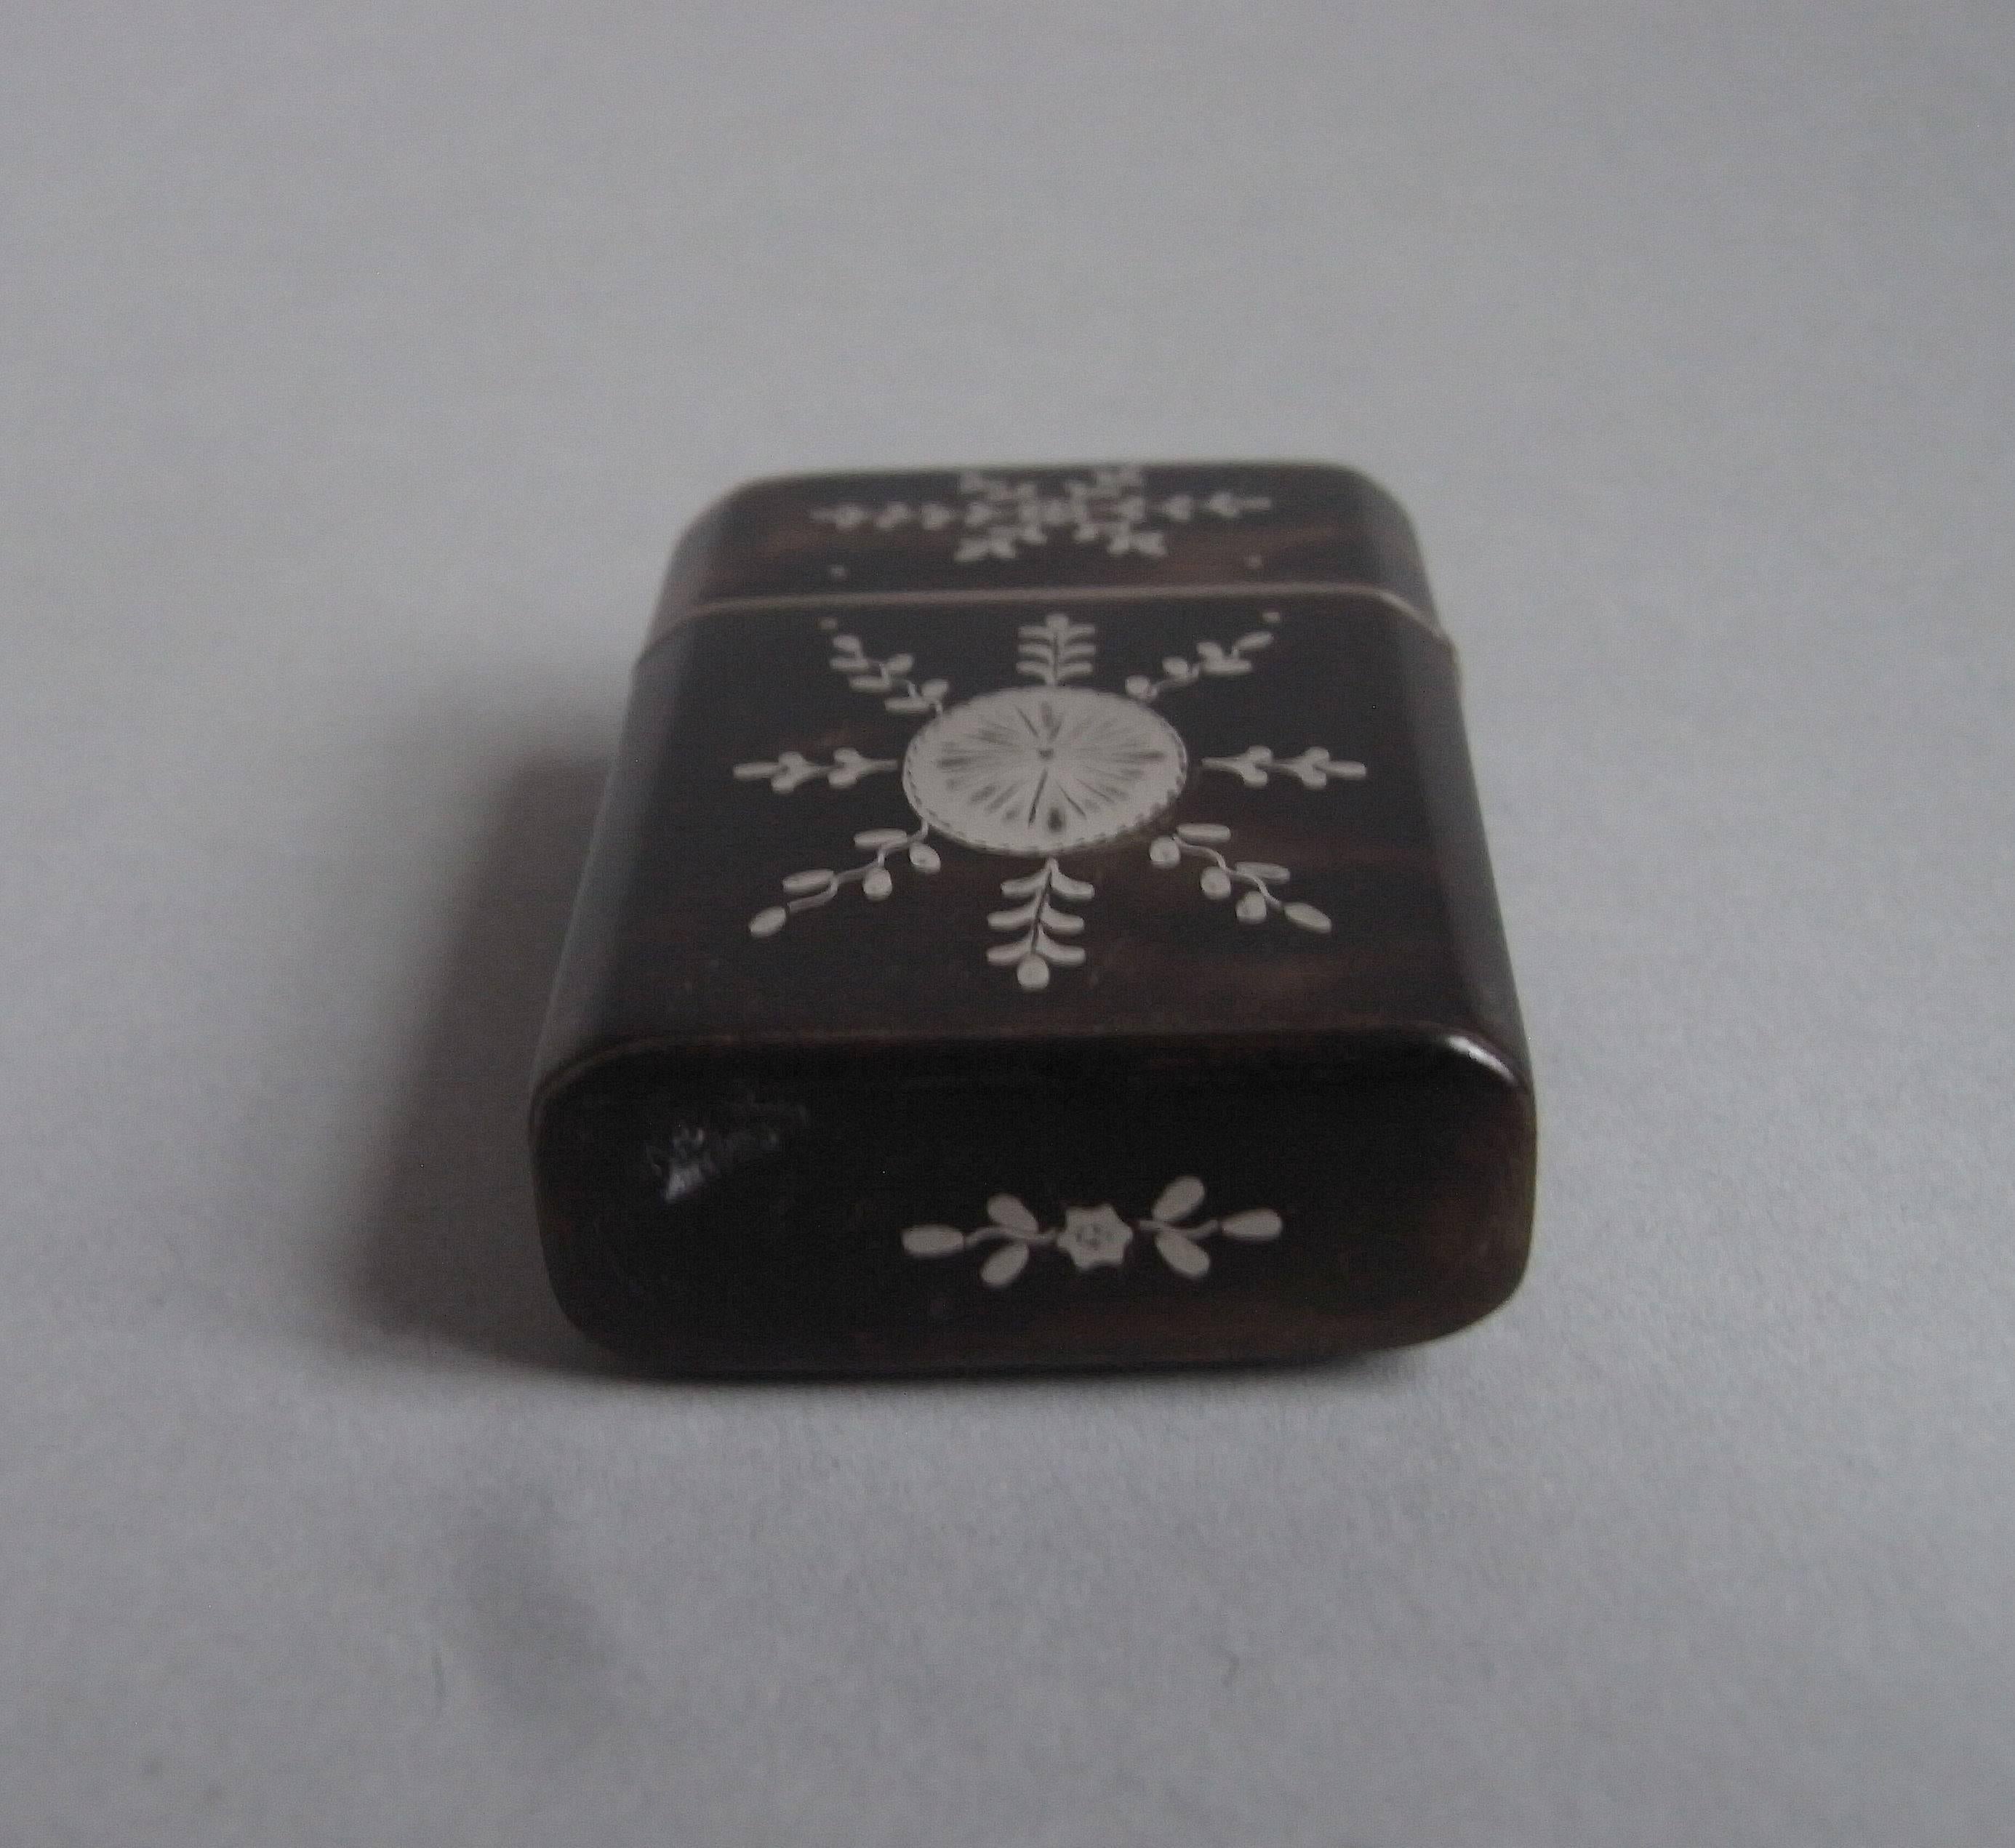 The Etui is of a slightly tapering rectangular form, with cut corners. The main body is decorated, on both sides, with stylized snow flake designs, around a central oval classical medallion. The hinged cover opens up to reveal the two original